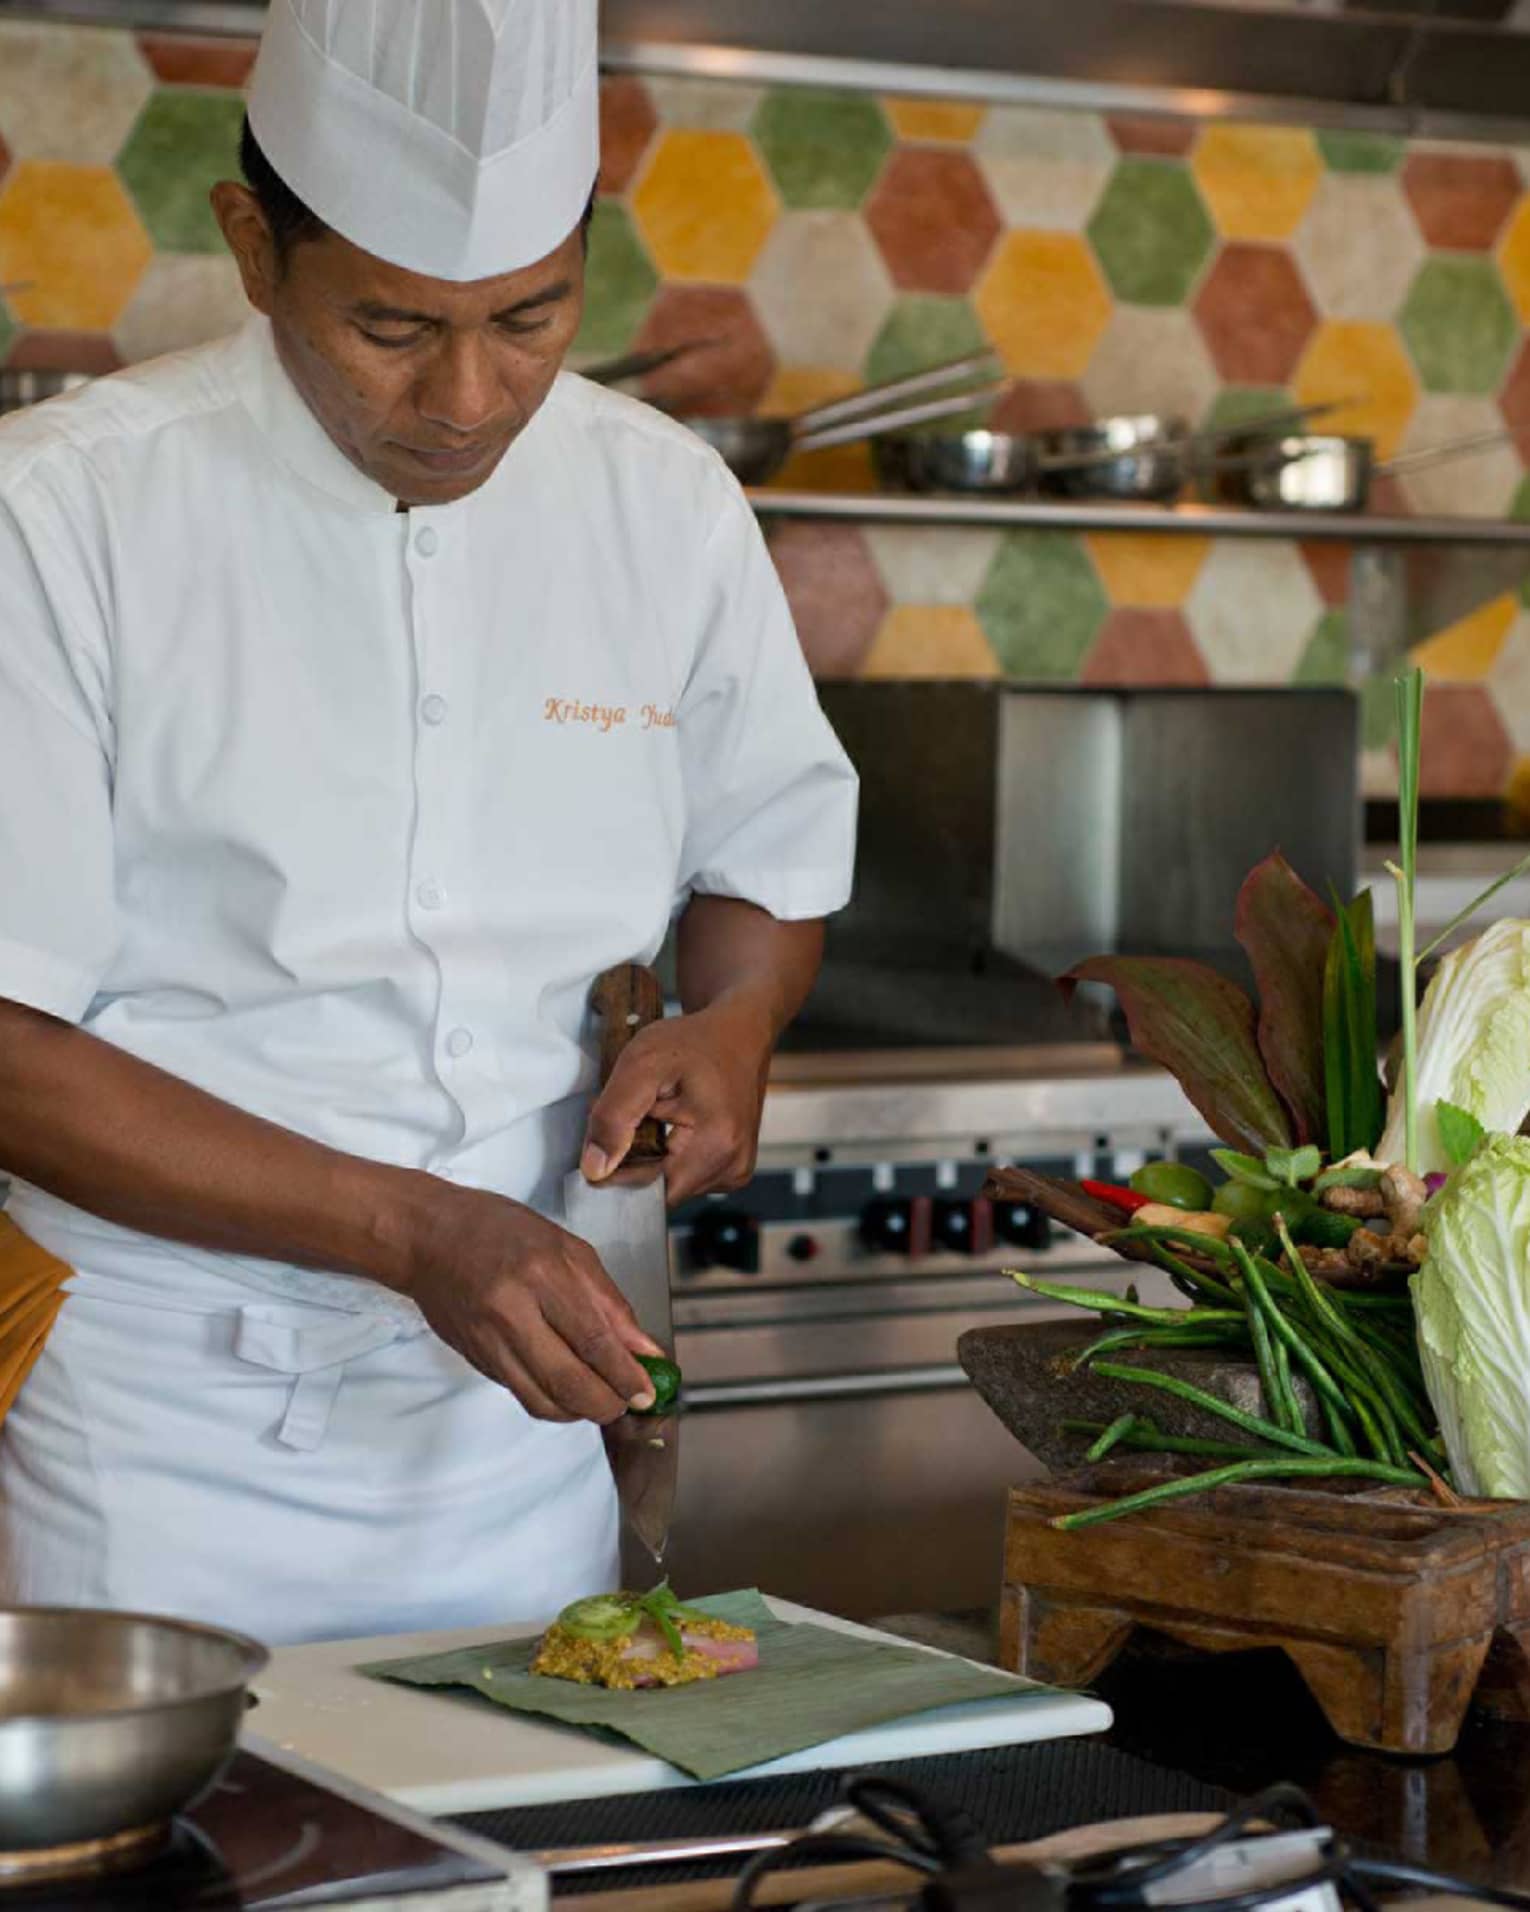 Chef in white uniform squeezes lime on large kitchen knife over dish, next to heads of fresh lettuce and whole peppers